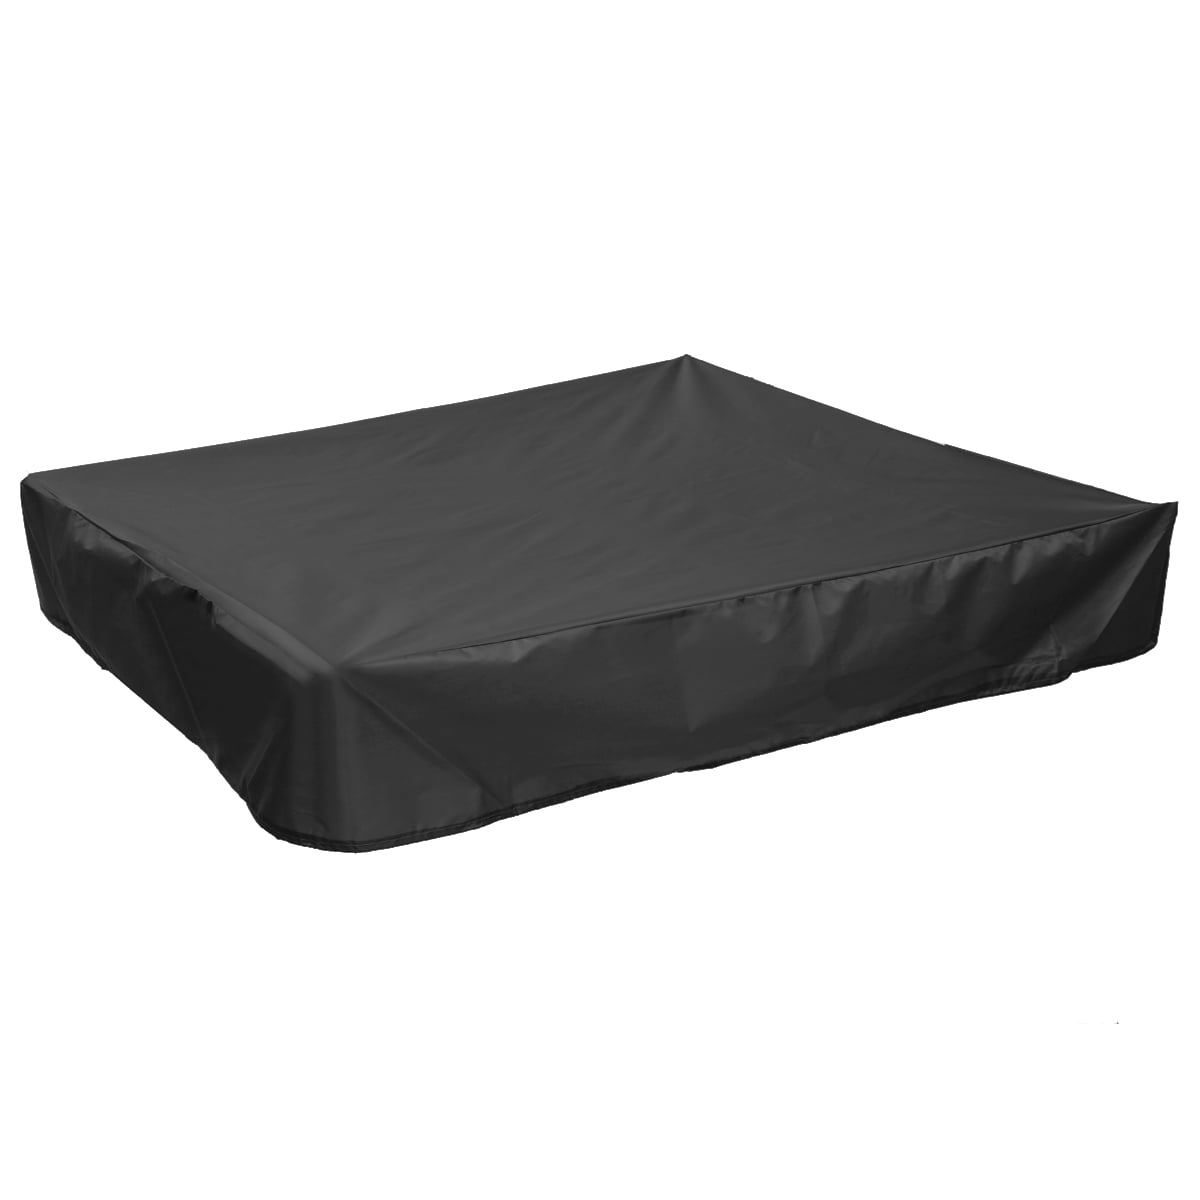 Black Sandboxes Sandpit Cover-72in，Kids Sandbox Cover for Protects Sand and Toys from Pollution Waterproof and Sun Protection 